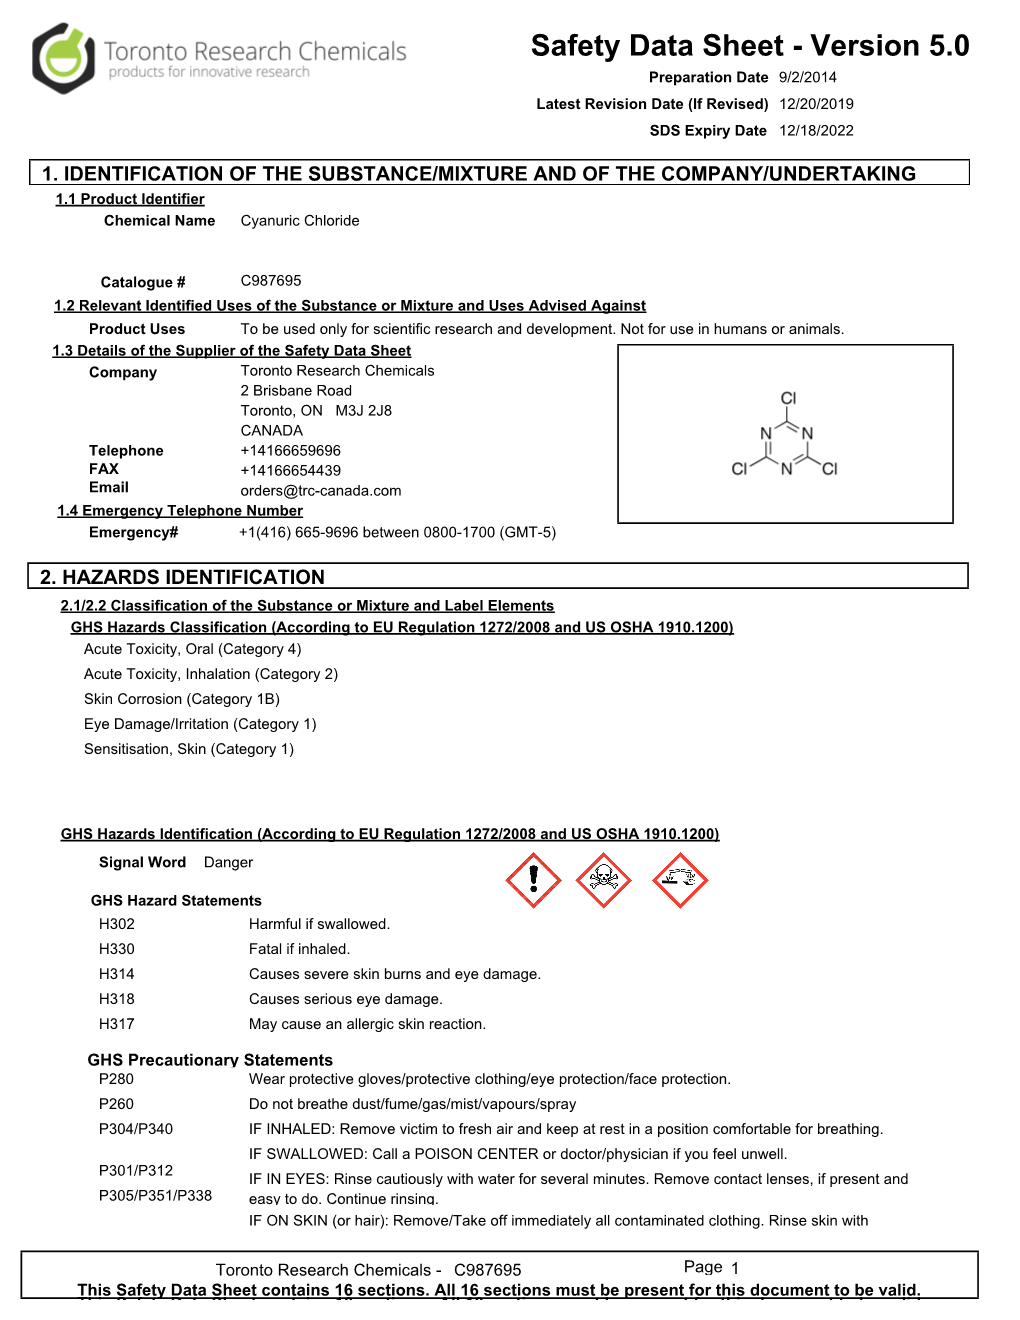 Safety Data Sheet - Version 5.0 Preparation Date 9/2/2014 Latest Revision Date (If Revised) 12/20/2019 SDS Expiry Date 12/18/2022